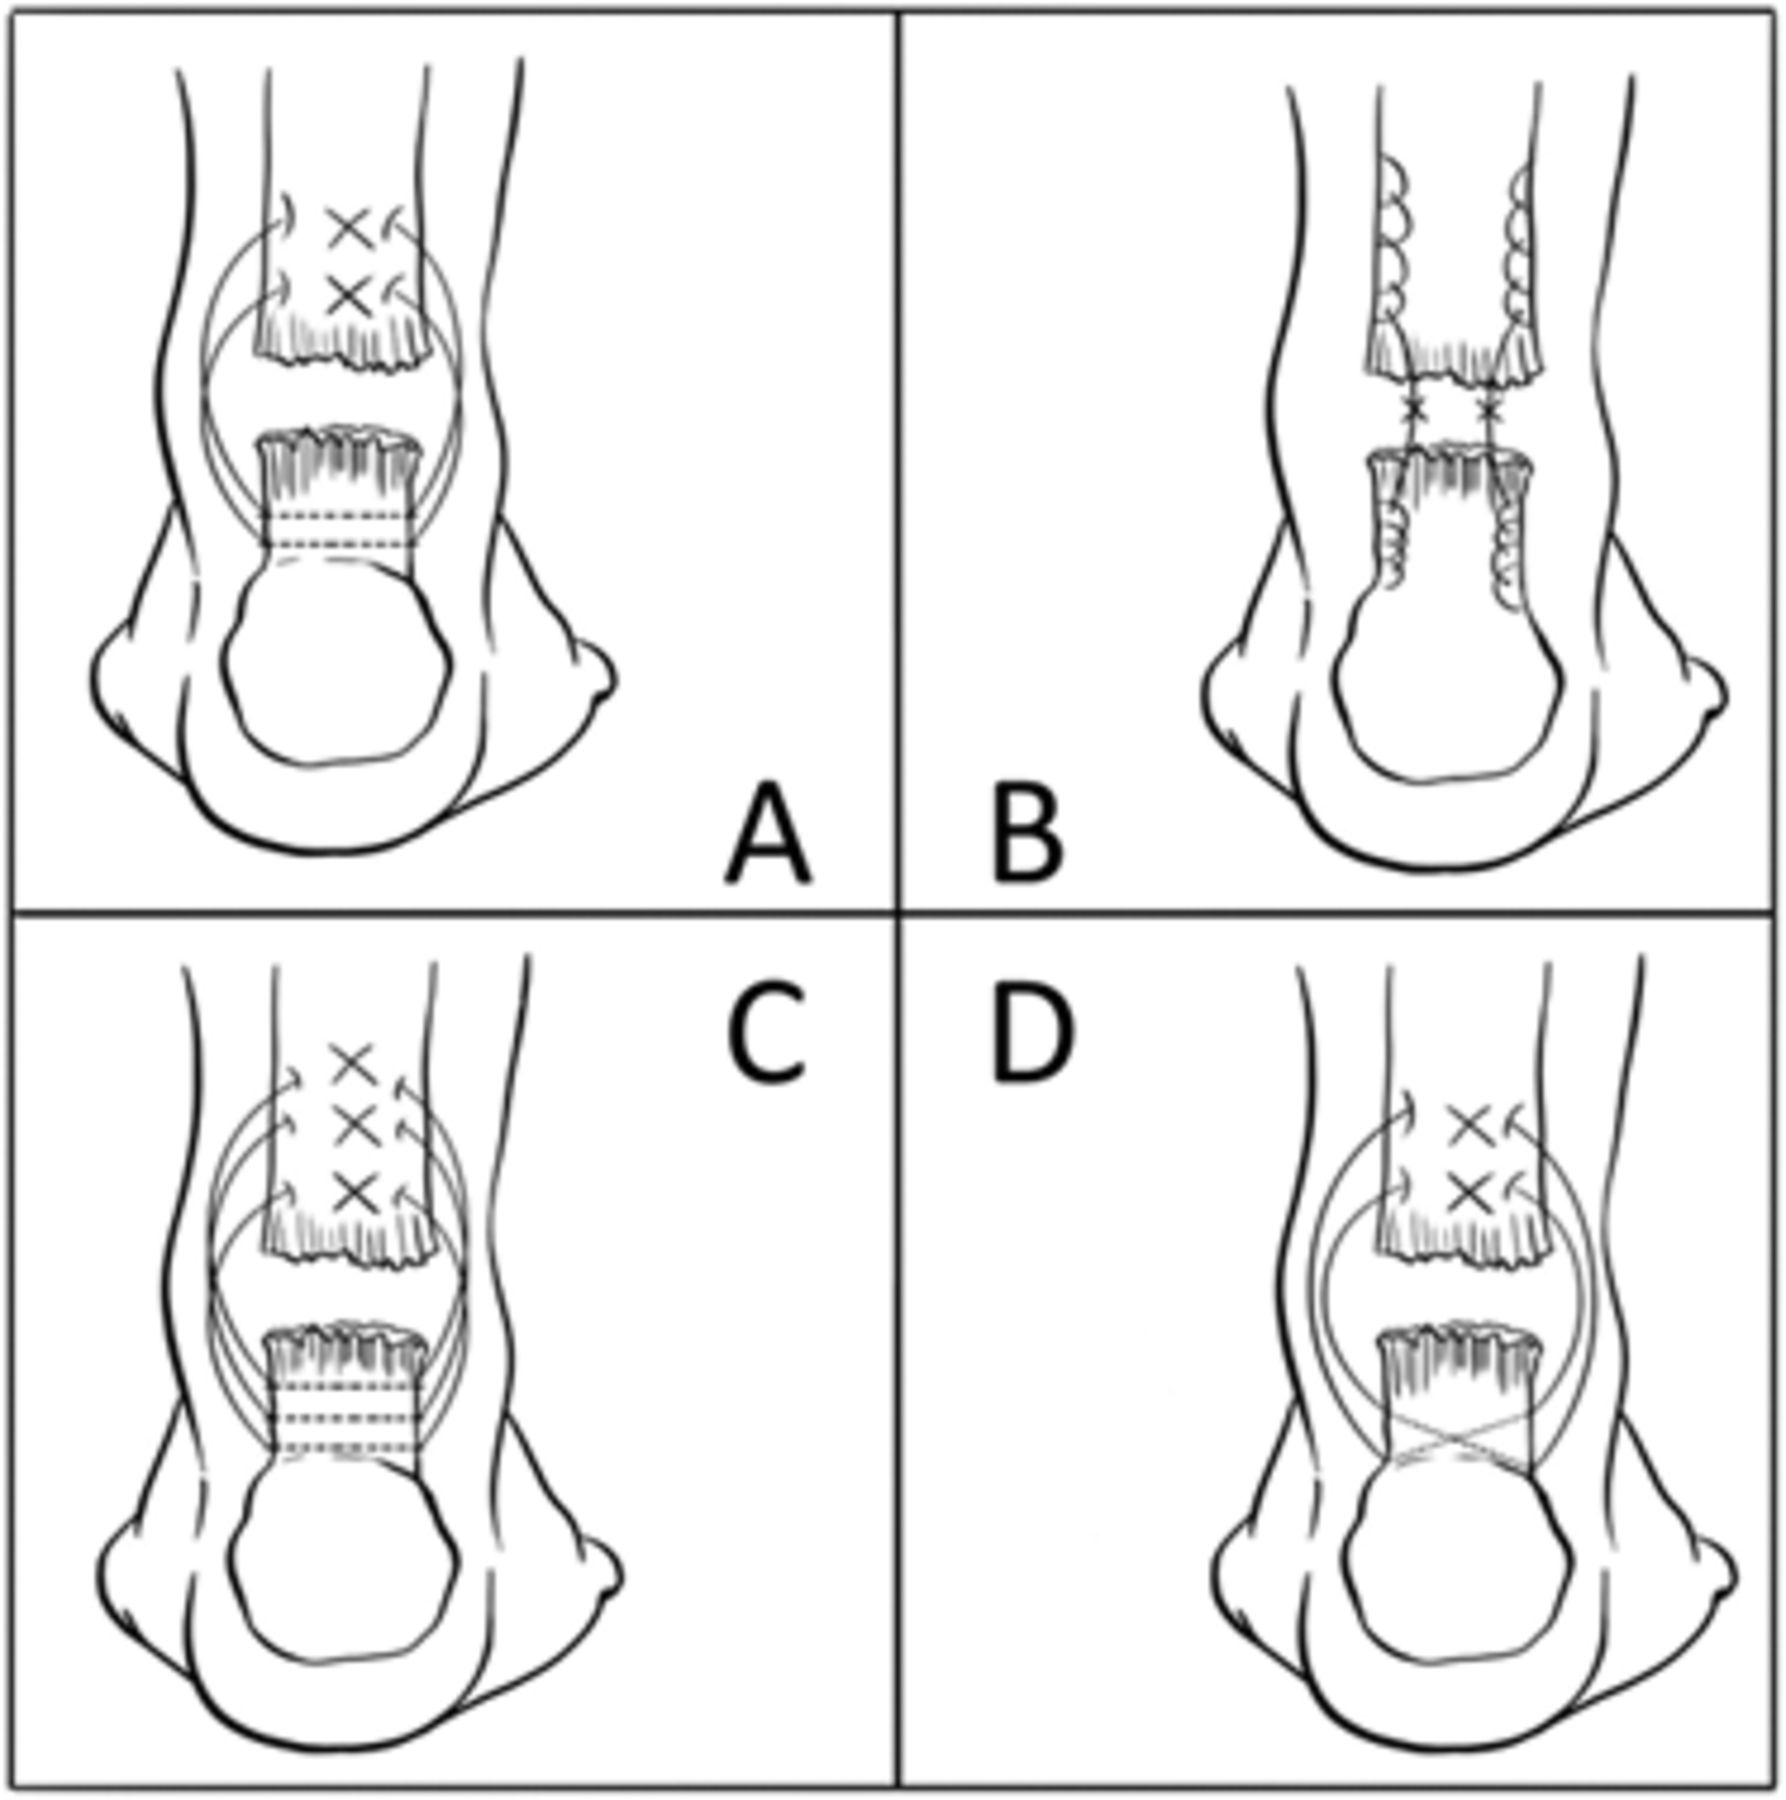 Fig. 3 
          Diagram showing the suture configurations
of the a) Dresden, b) Krackow, c) triple and d) oblique technique
(figure modified from original with permission).81
        